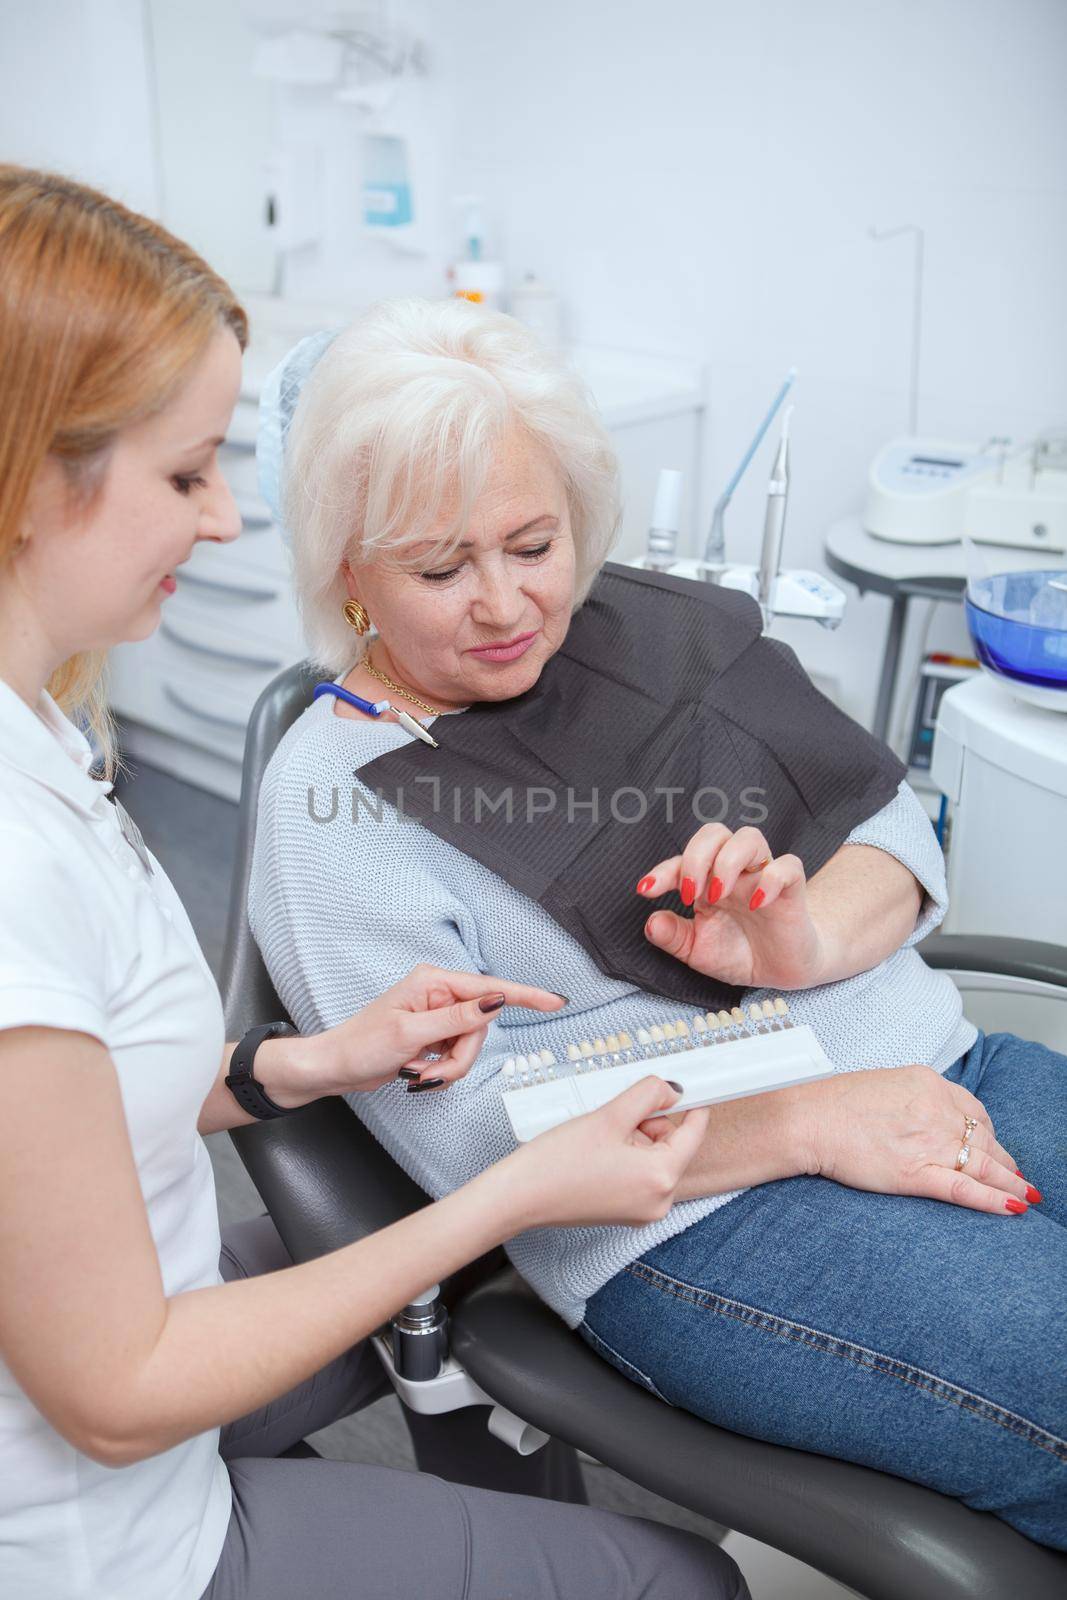 Vertical shot of a senior woman preparing to get teeth whitening at her dentists office